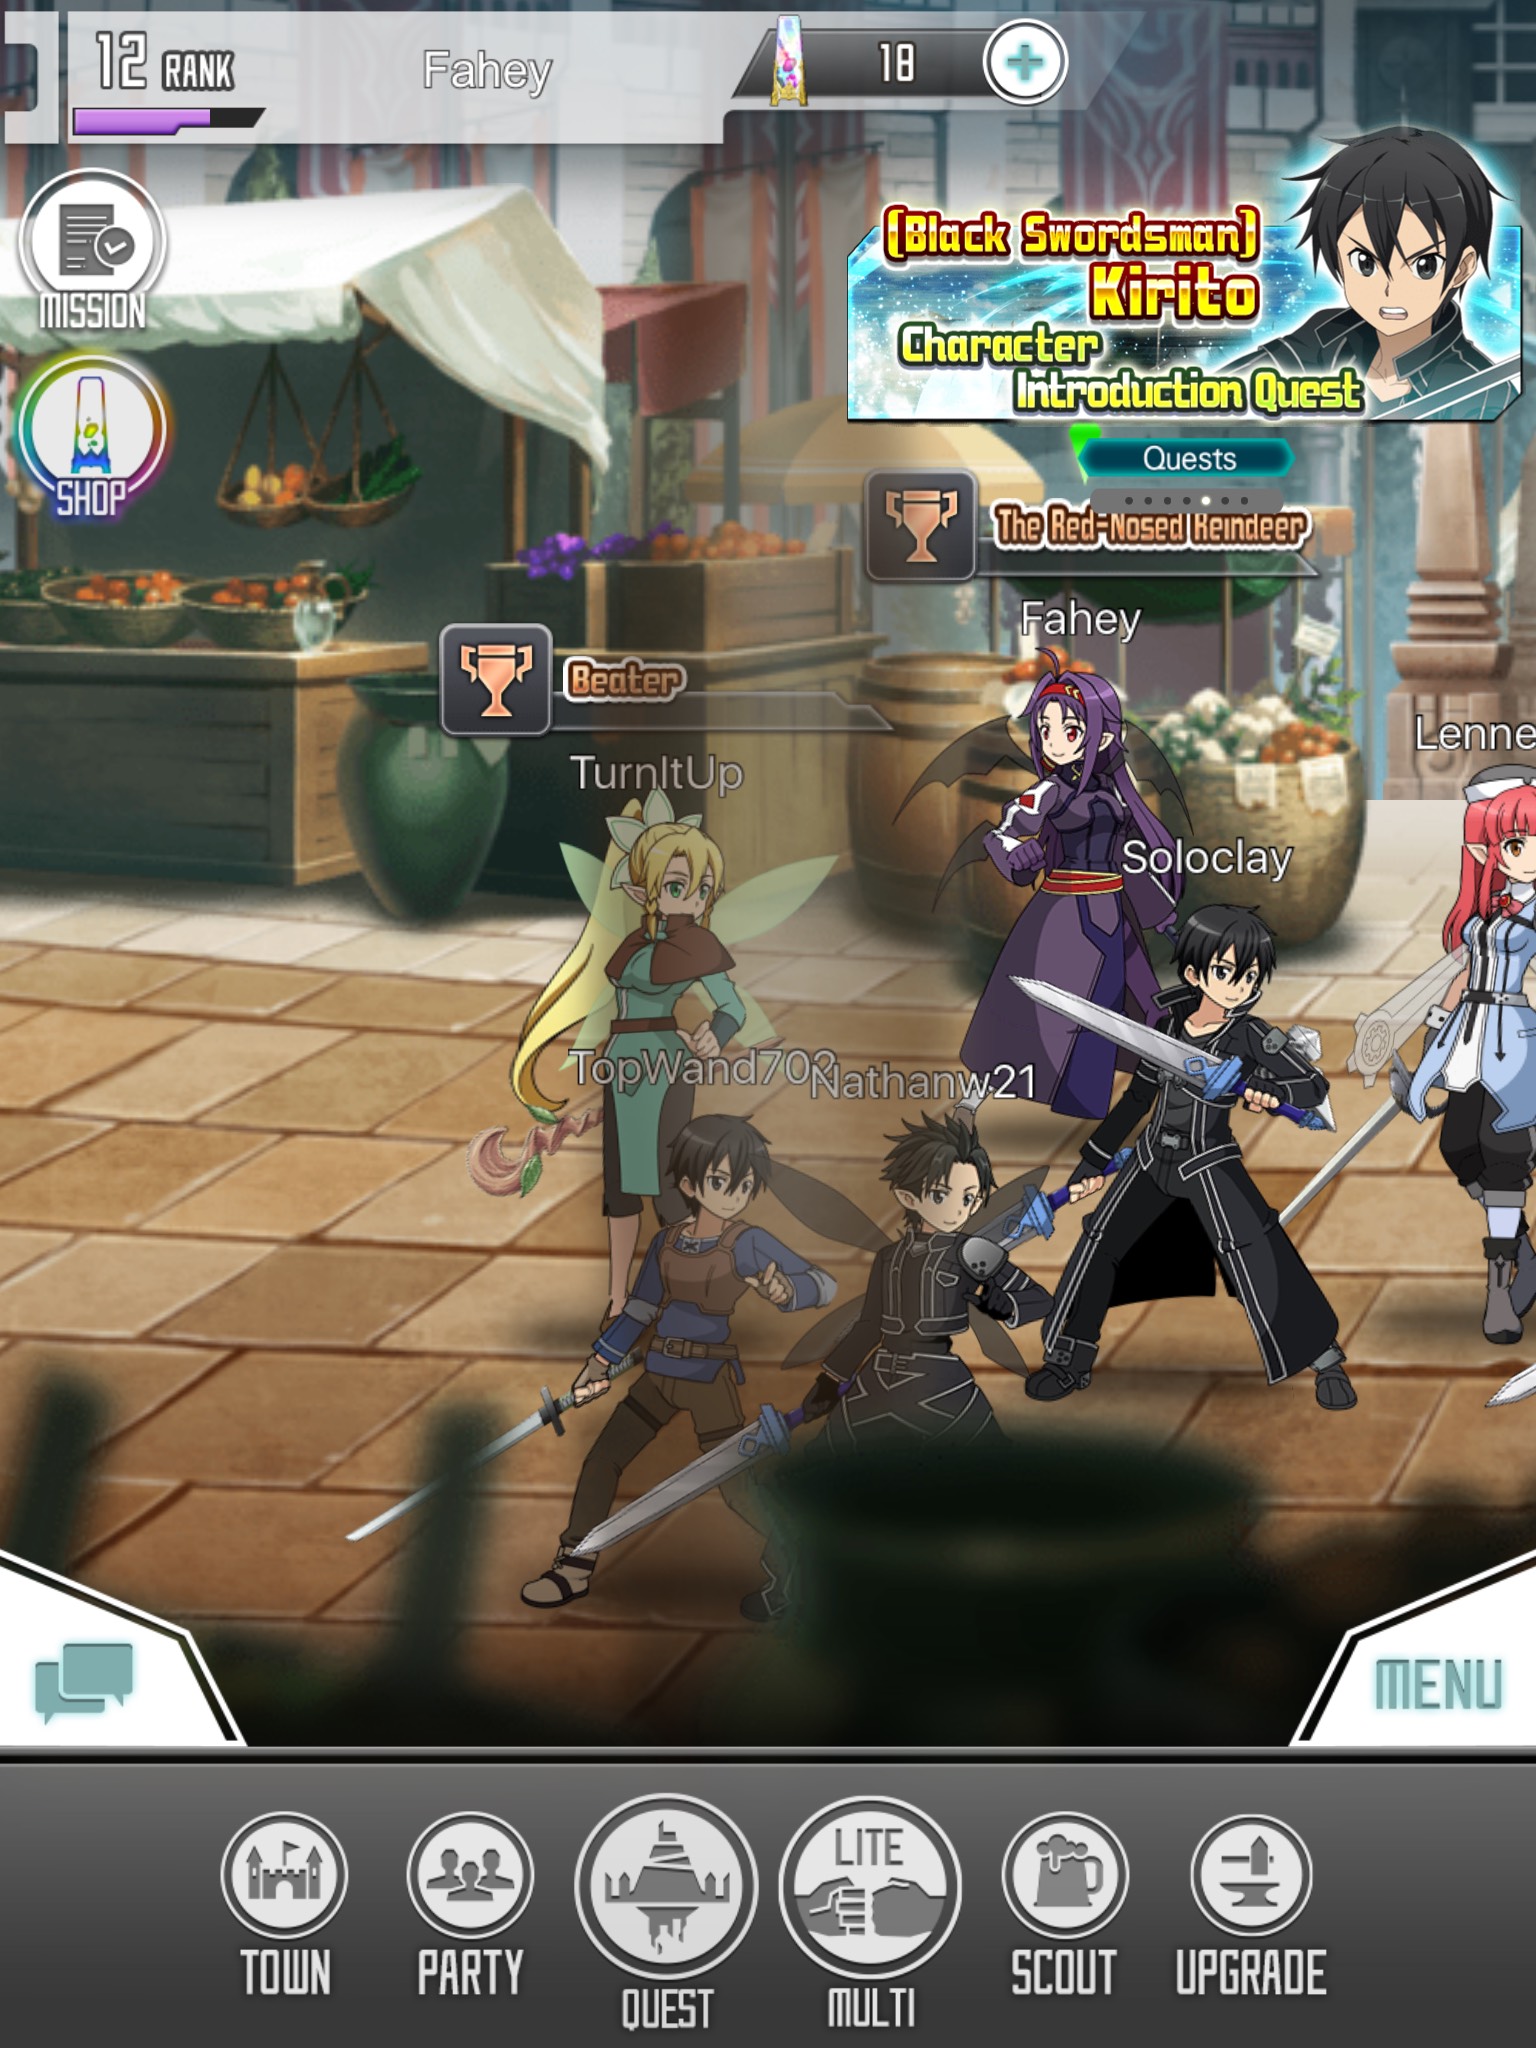 The Sword Art Online Mobile Game Is Worth A Try